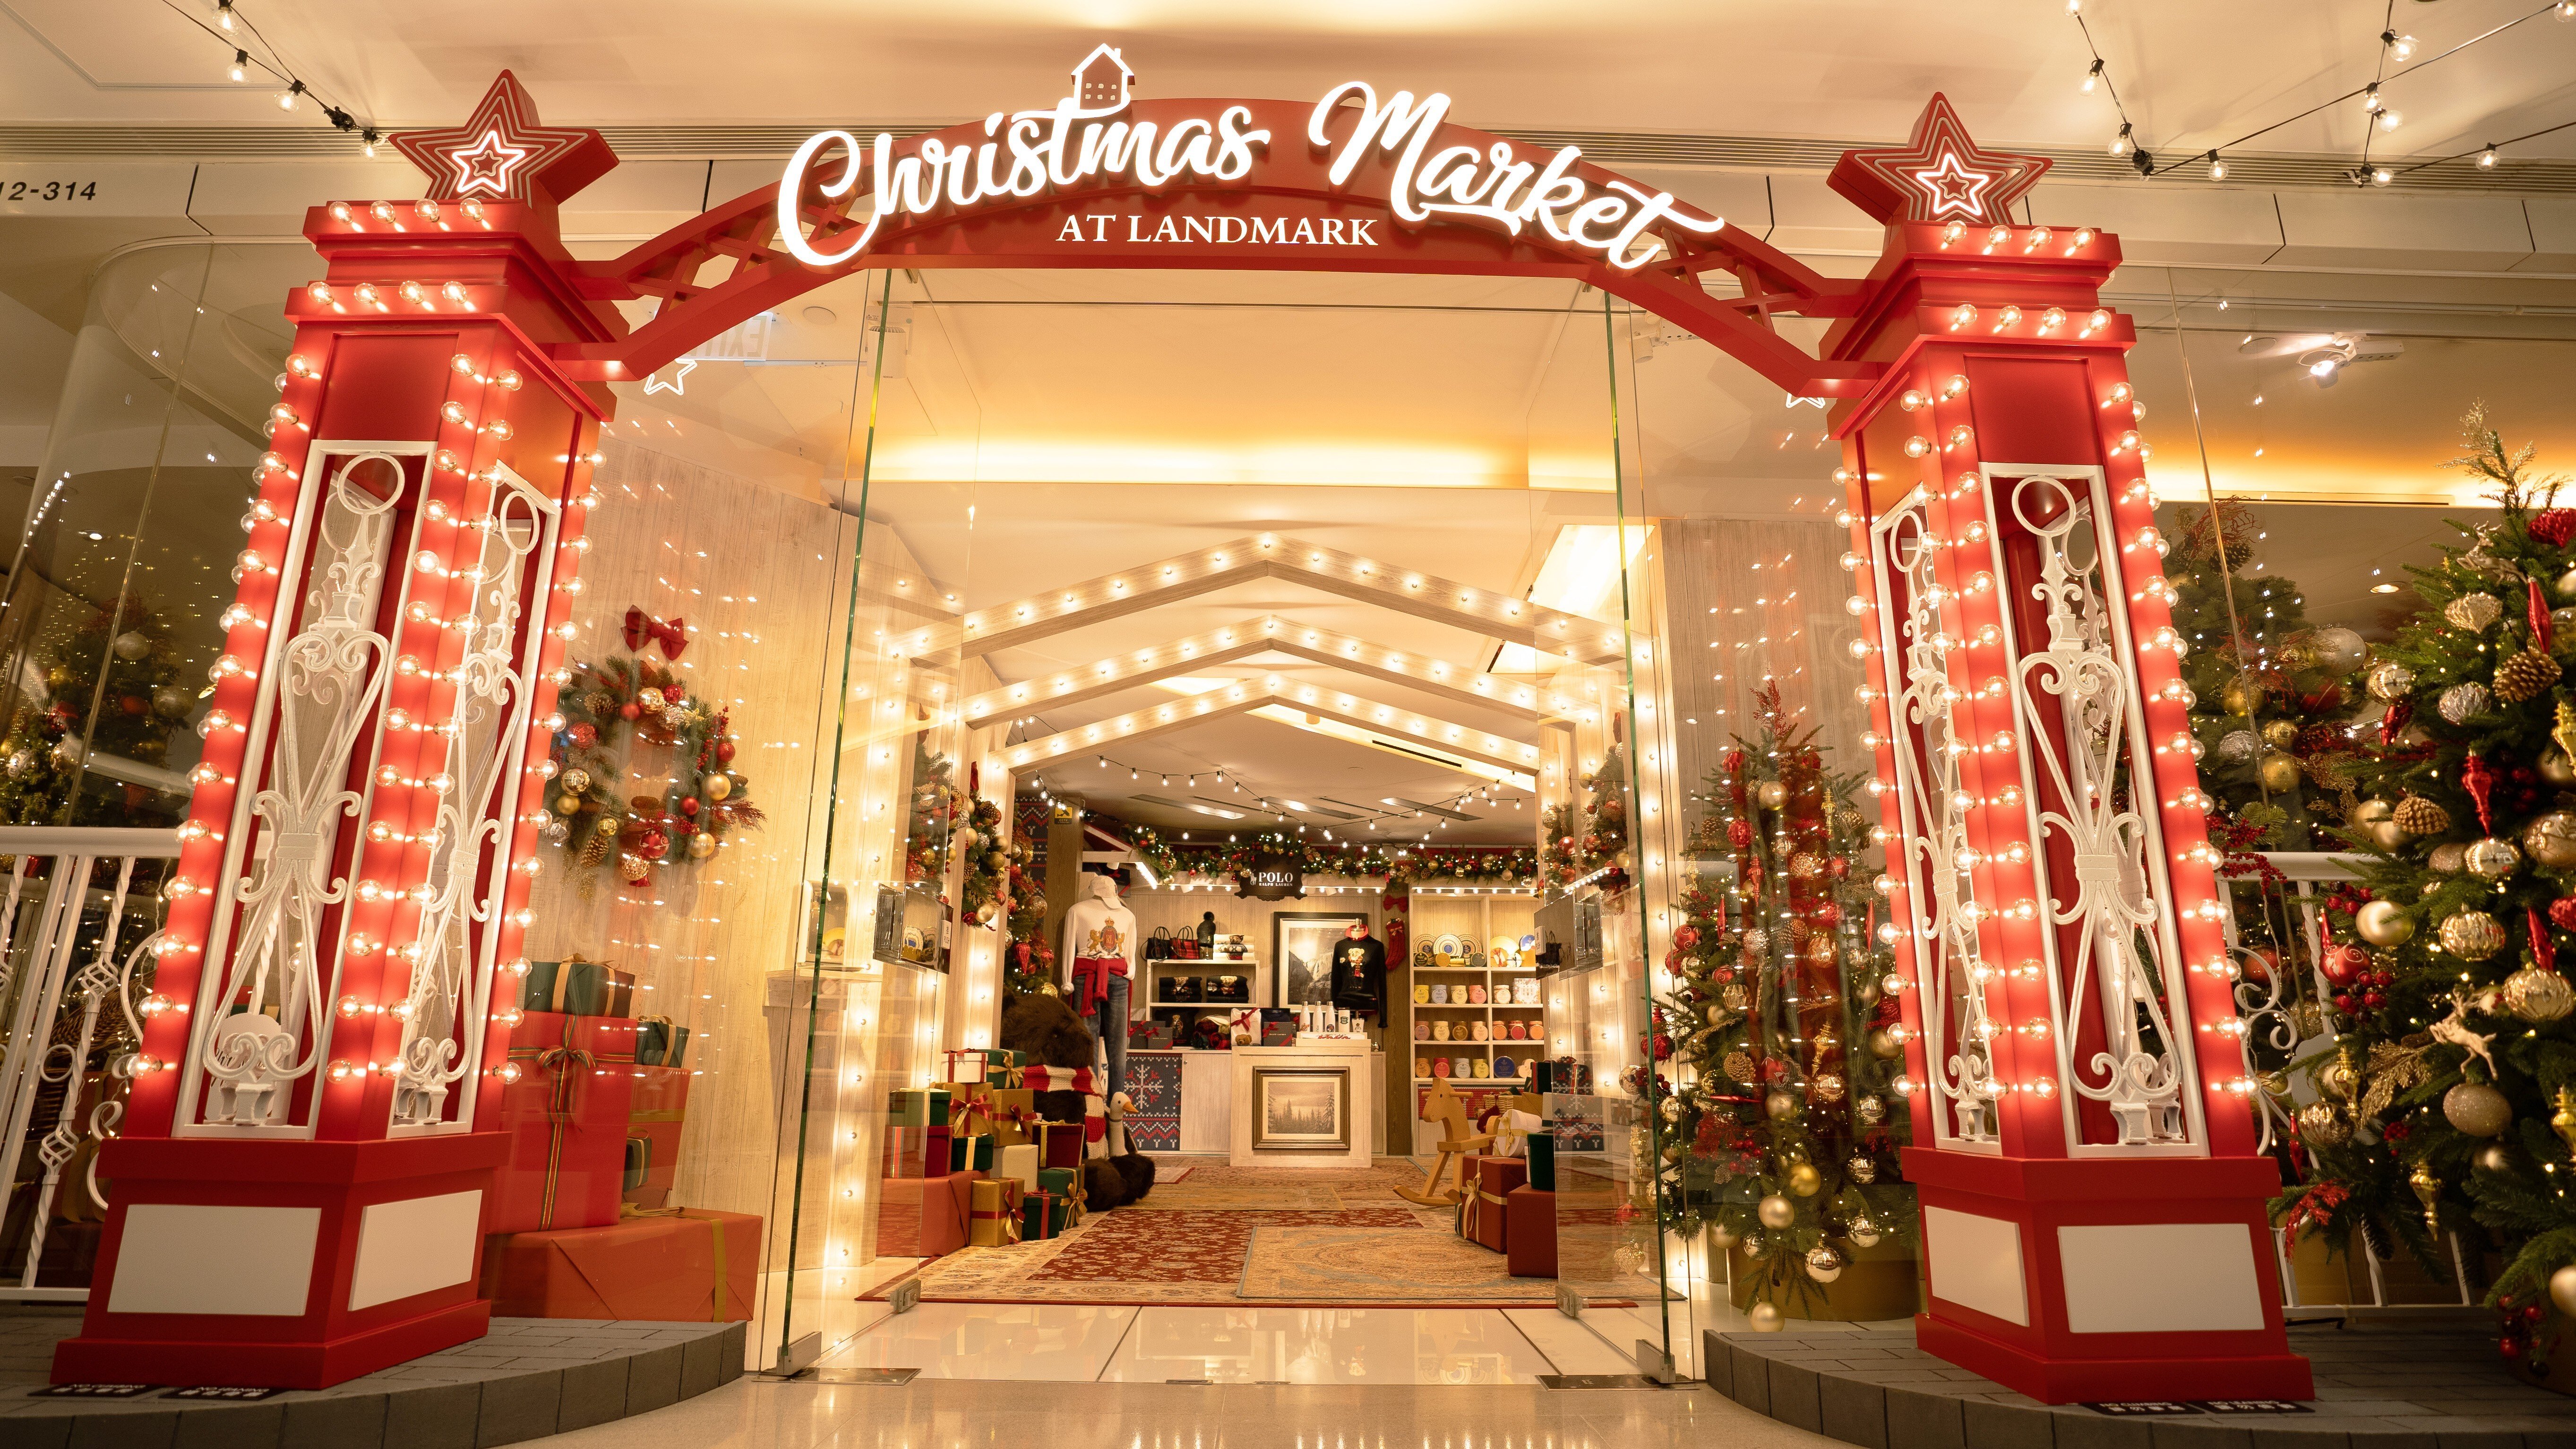 Hong Kong malls are gearing up for Christmas with displays and Christmas markets. Photo: handout